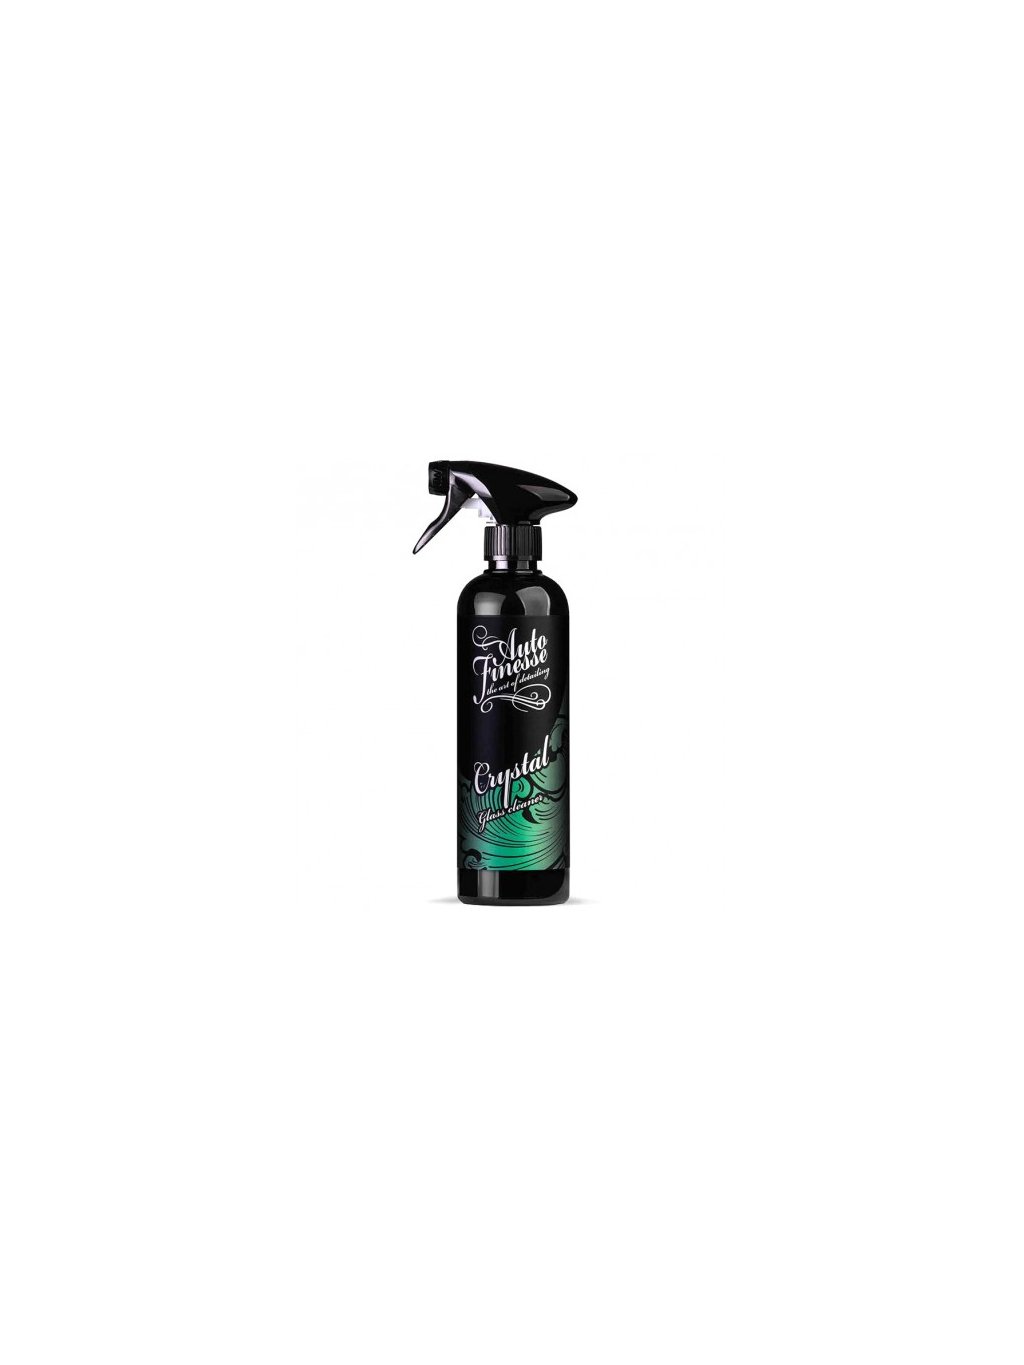 cistic oken auto finesse crystal glass cleaner